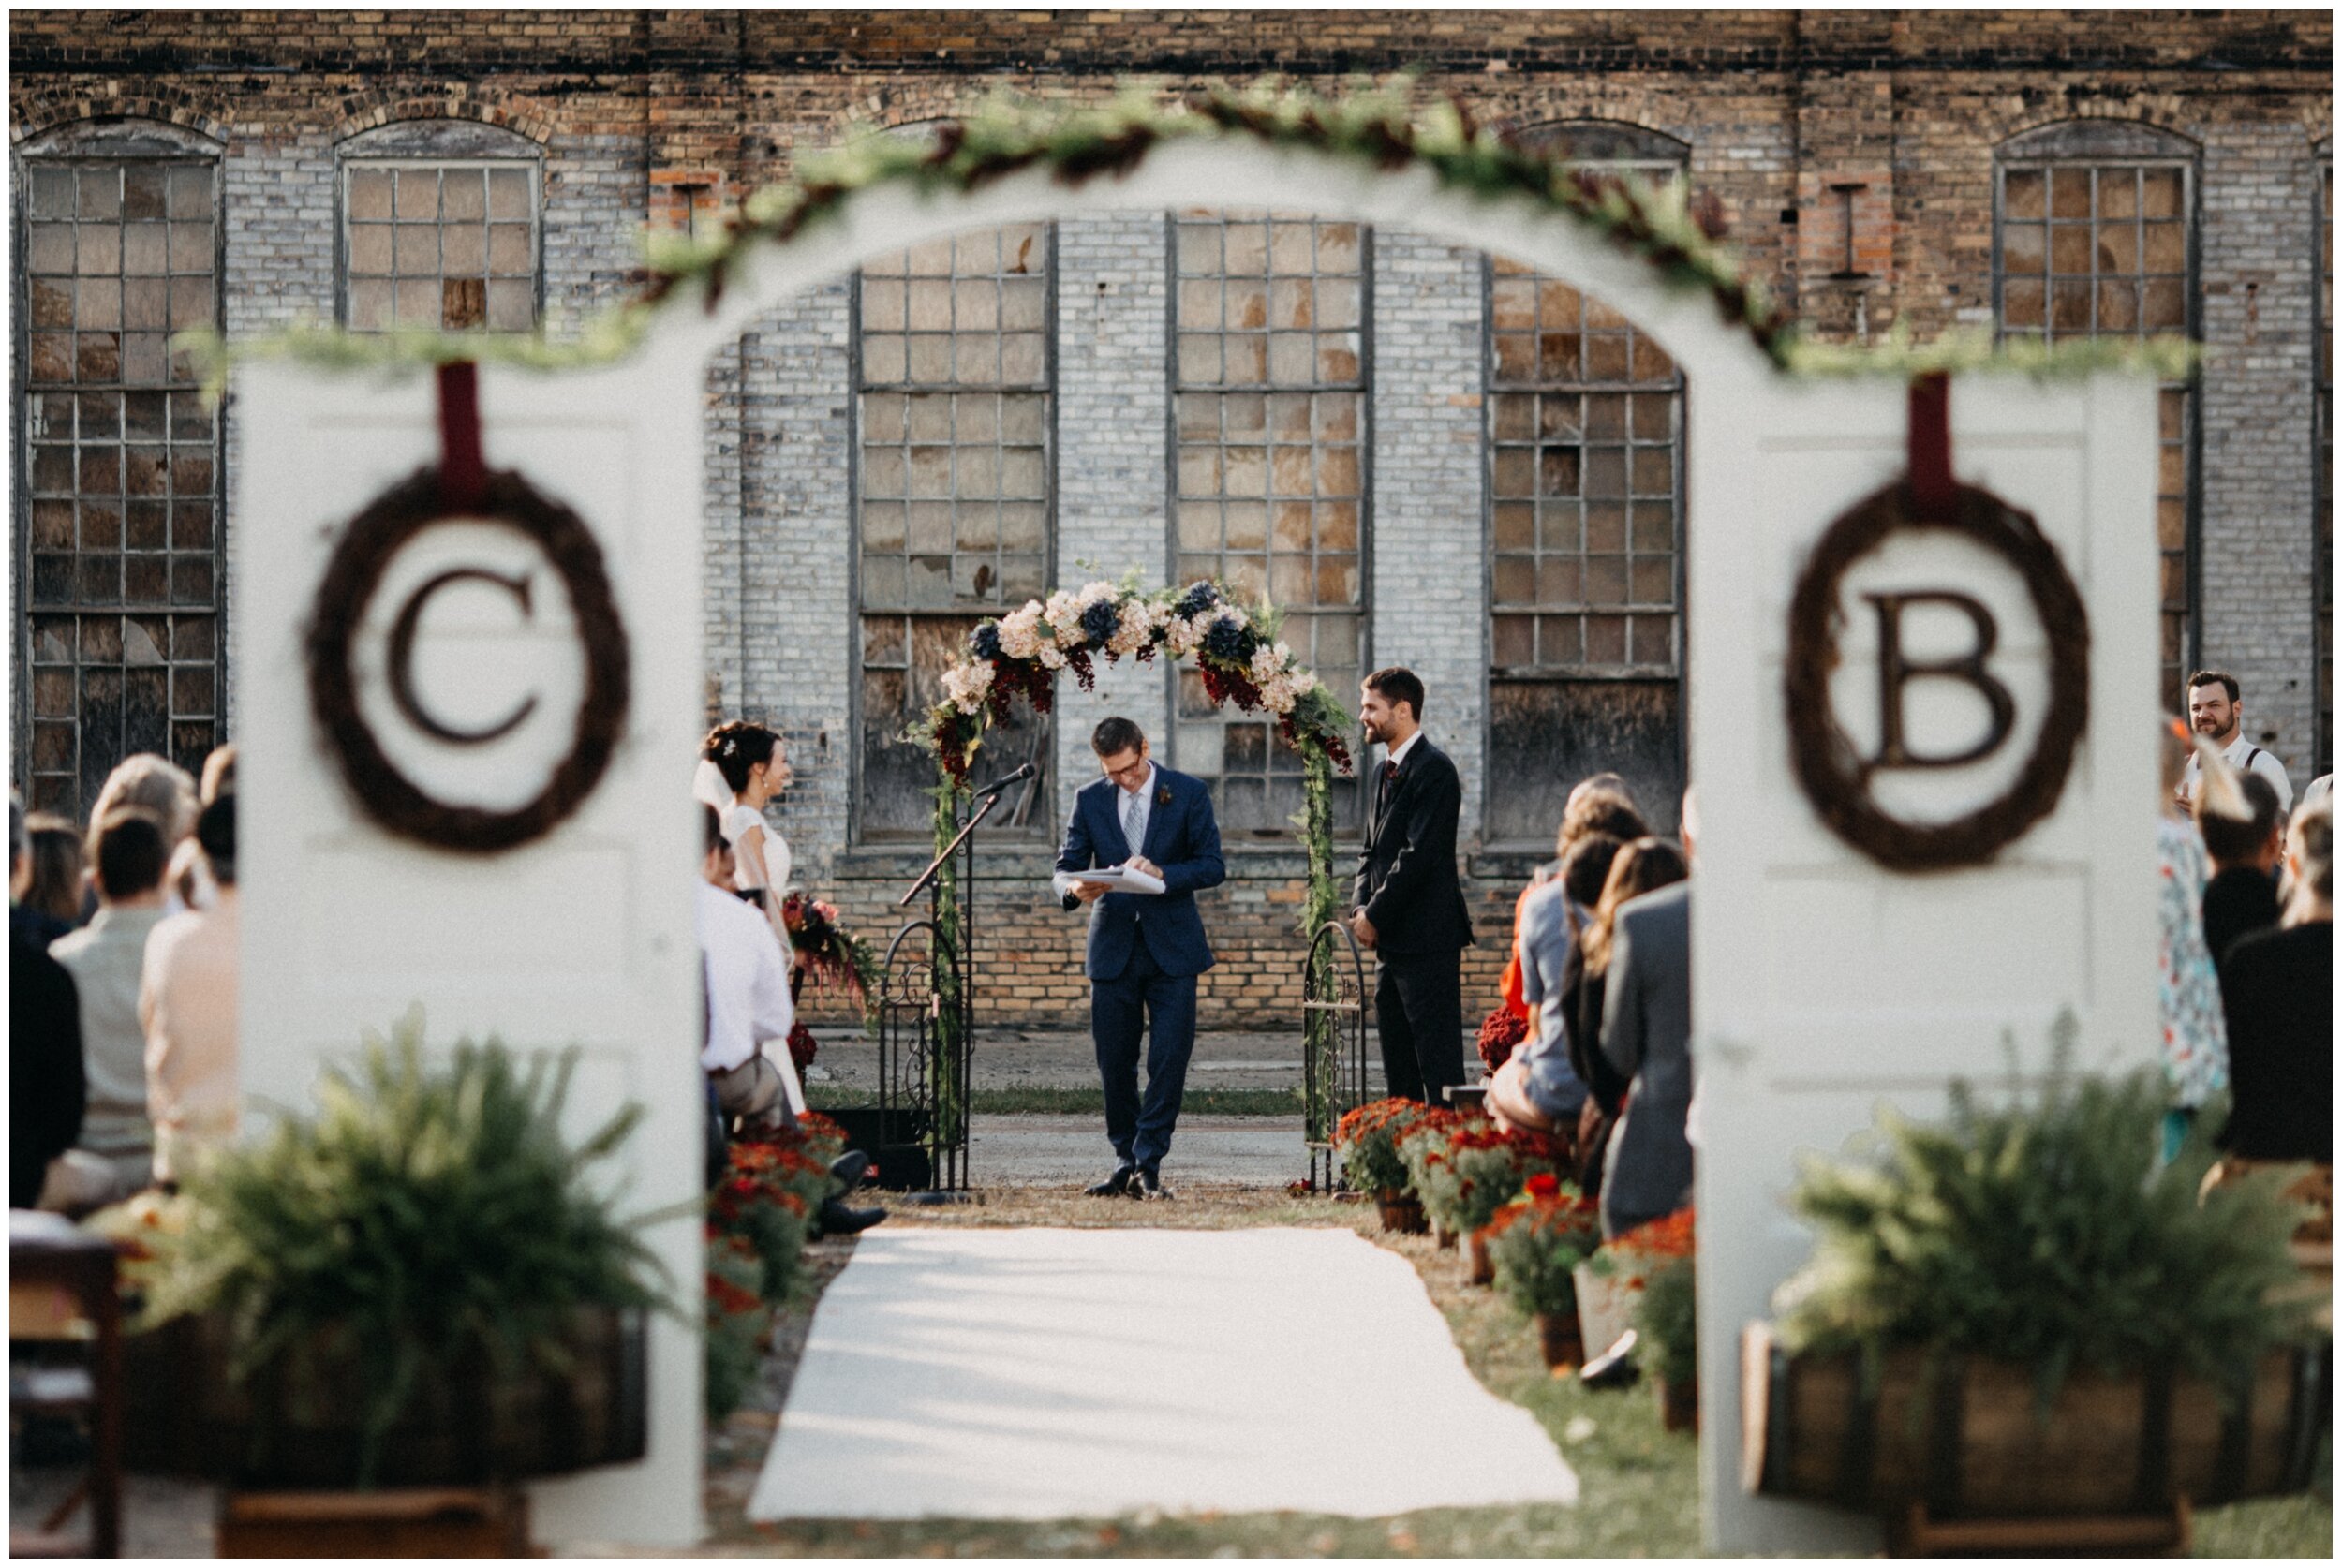 Romantic outdoor wedding ceremony at the Northern Pacific Center in Brainerd, Minnesota